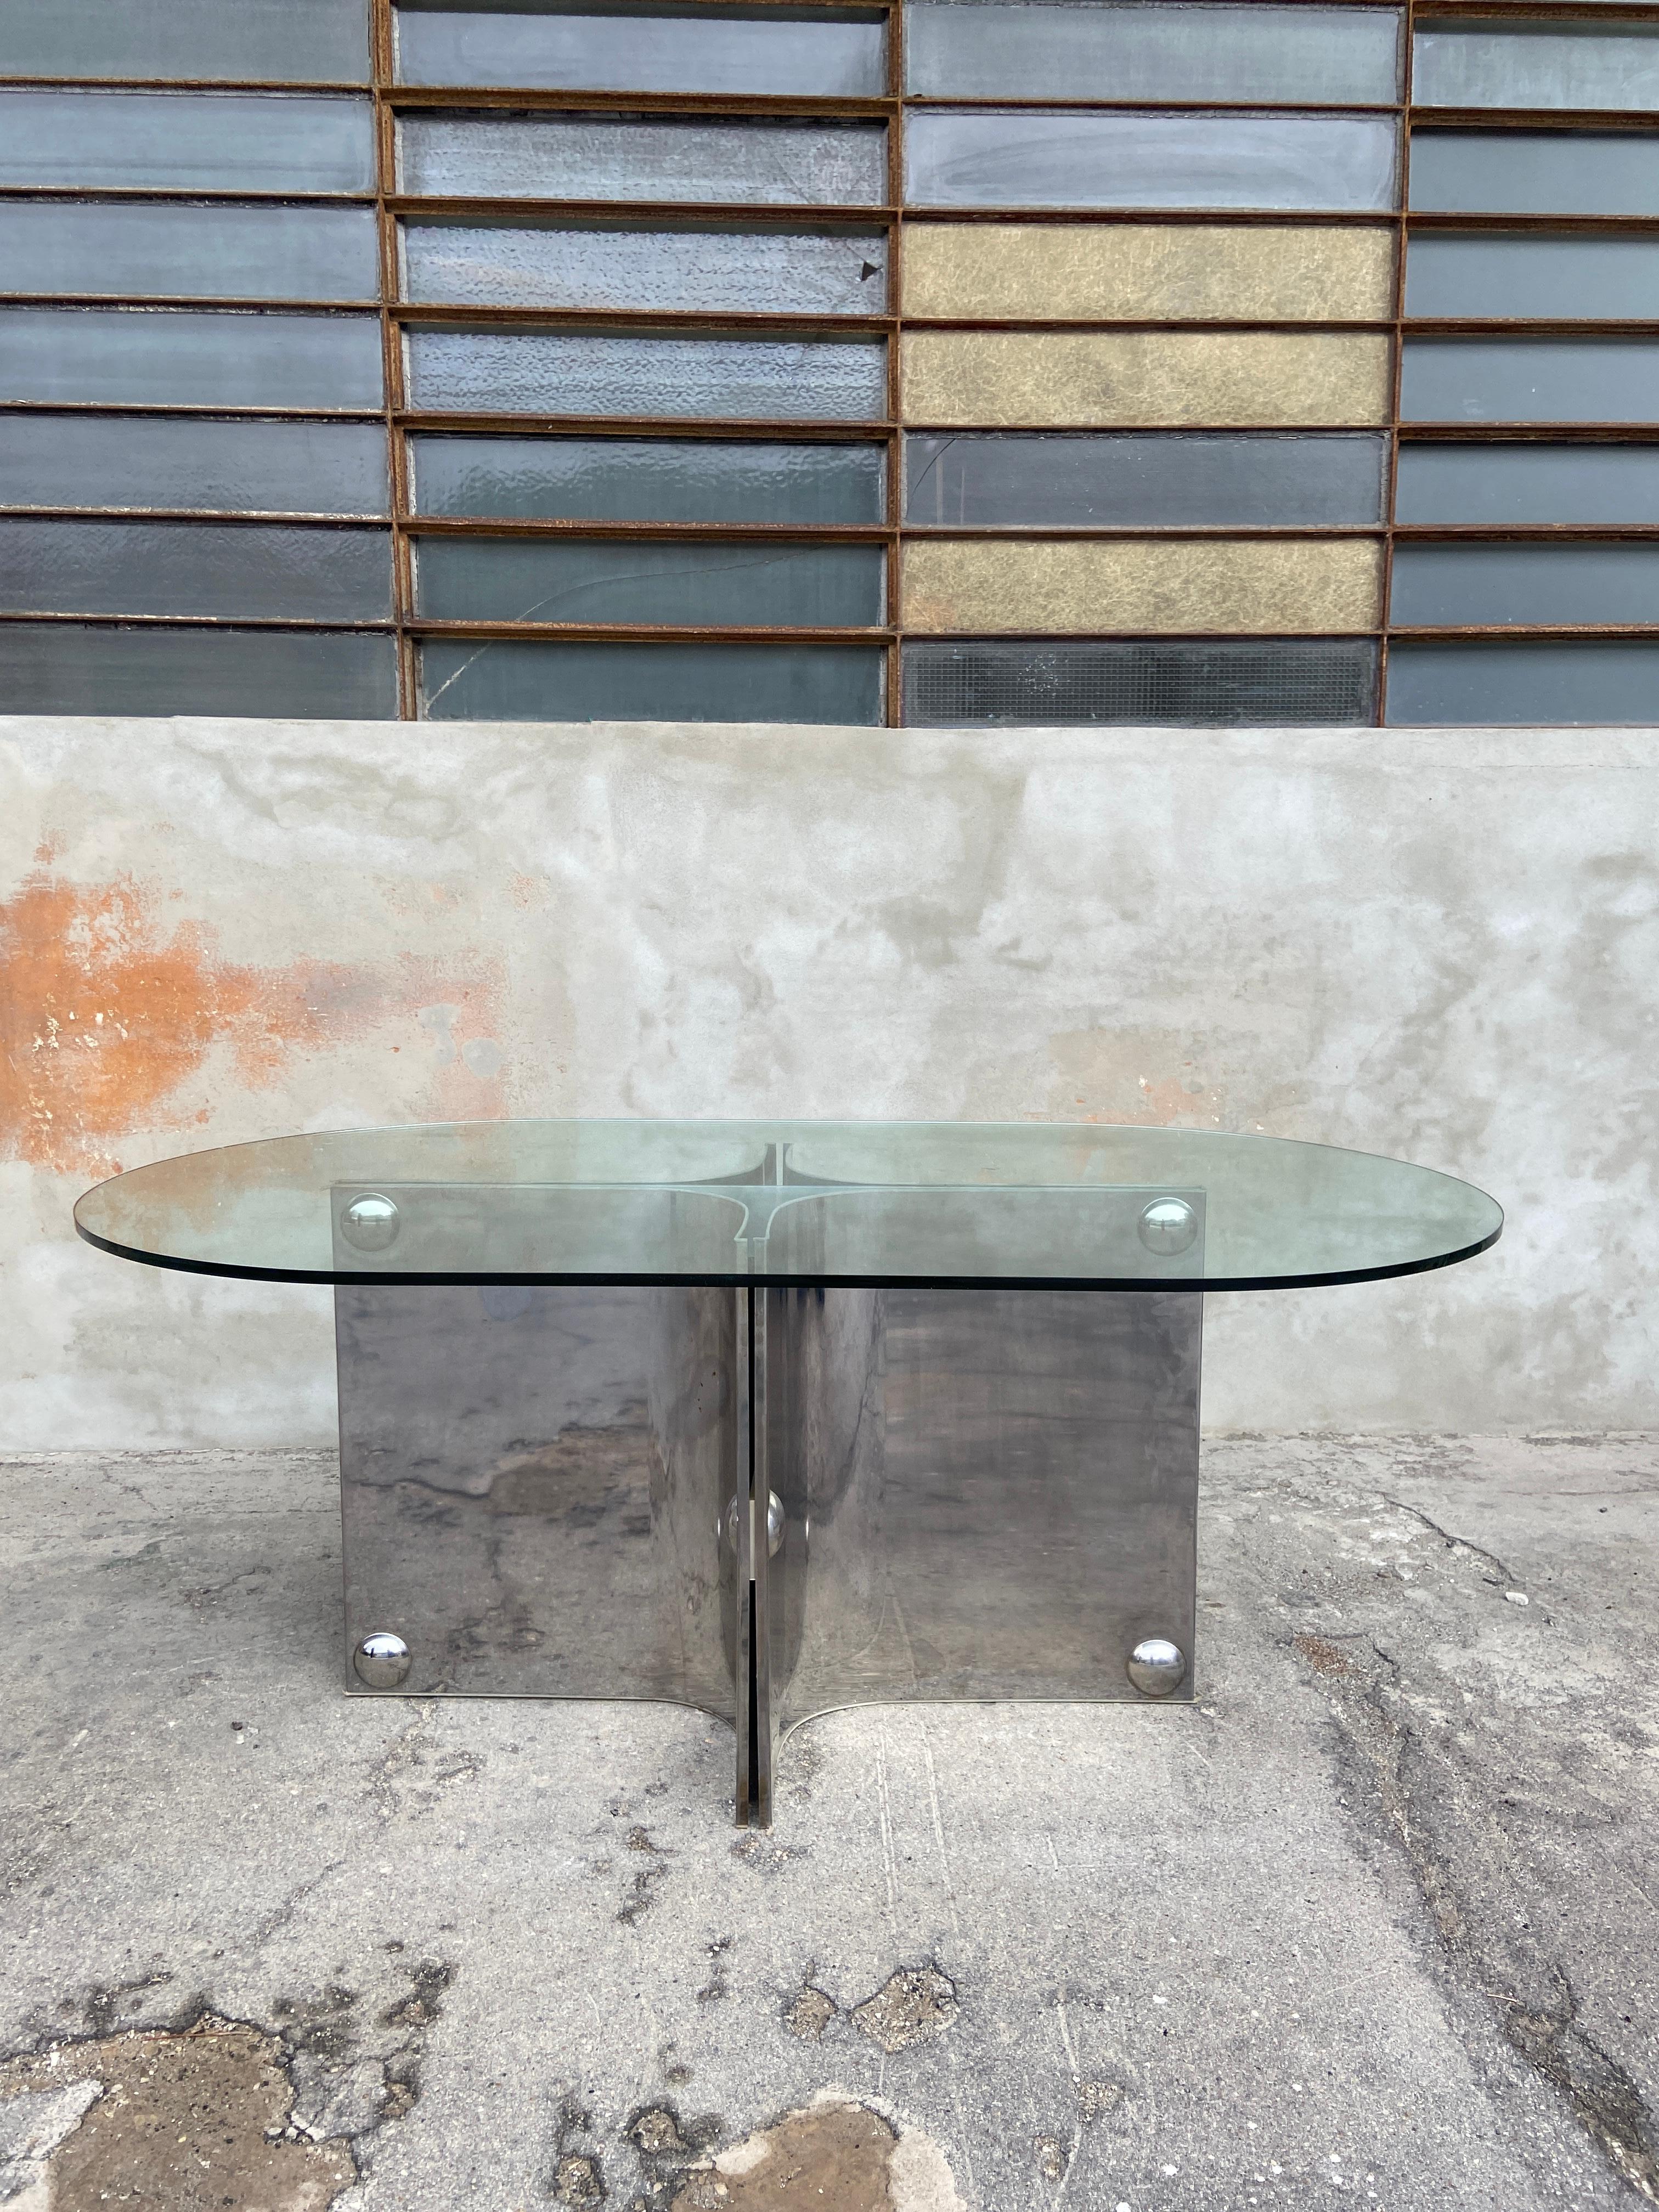 Mid-Century Modern Italian Dining or Center table with stainless steel basement and glass top by Vittorio Introini.
The table is in really good vintage conditions